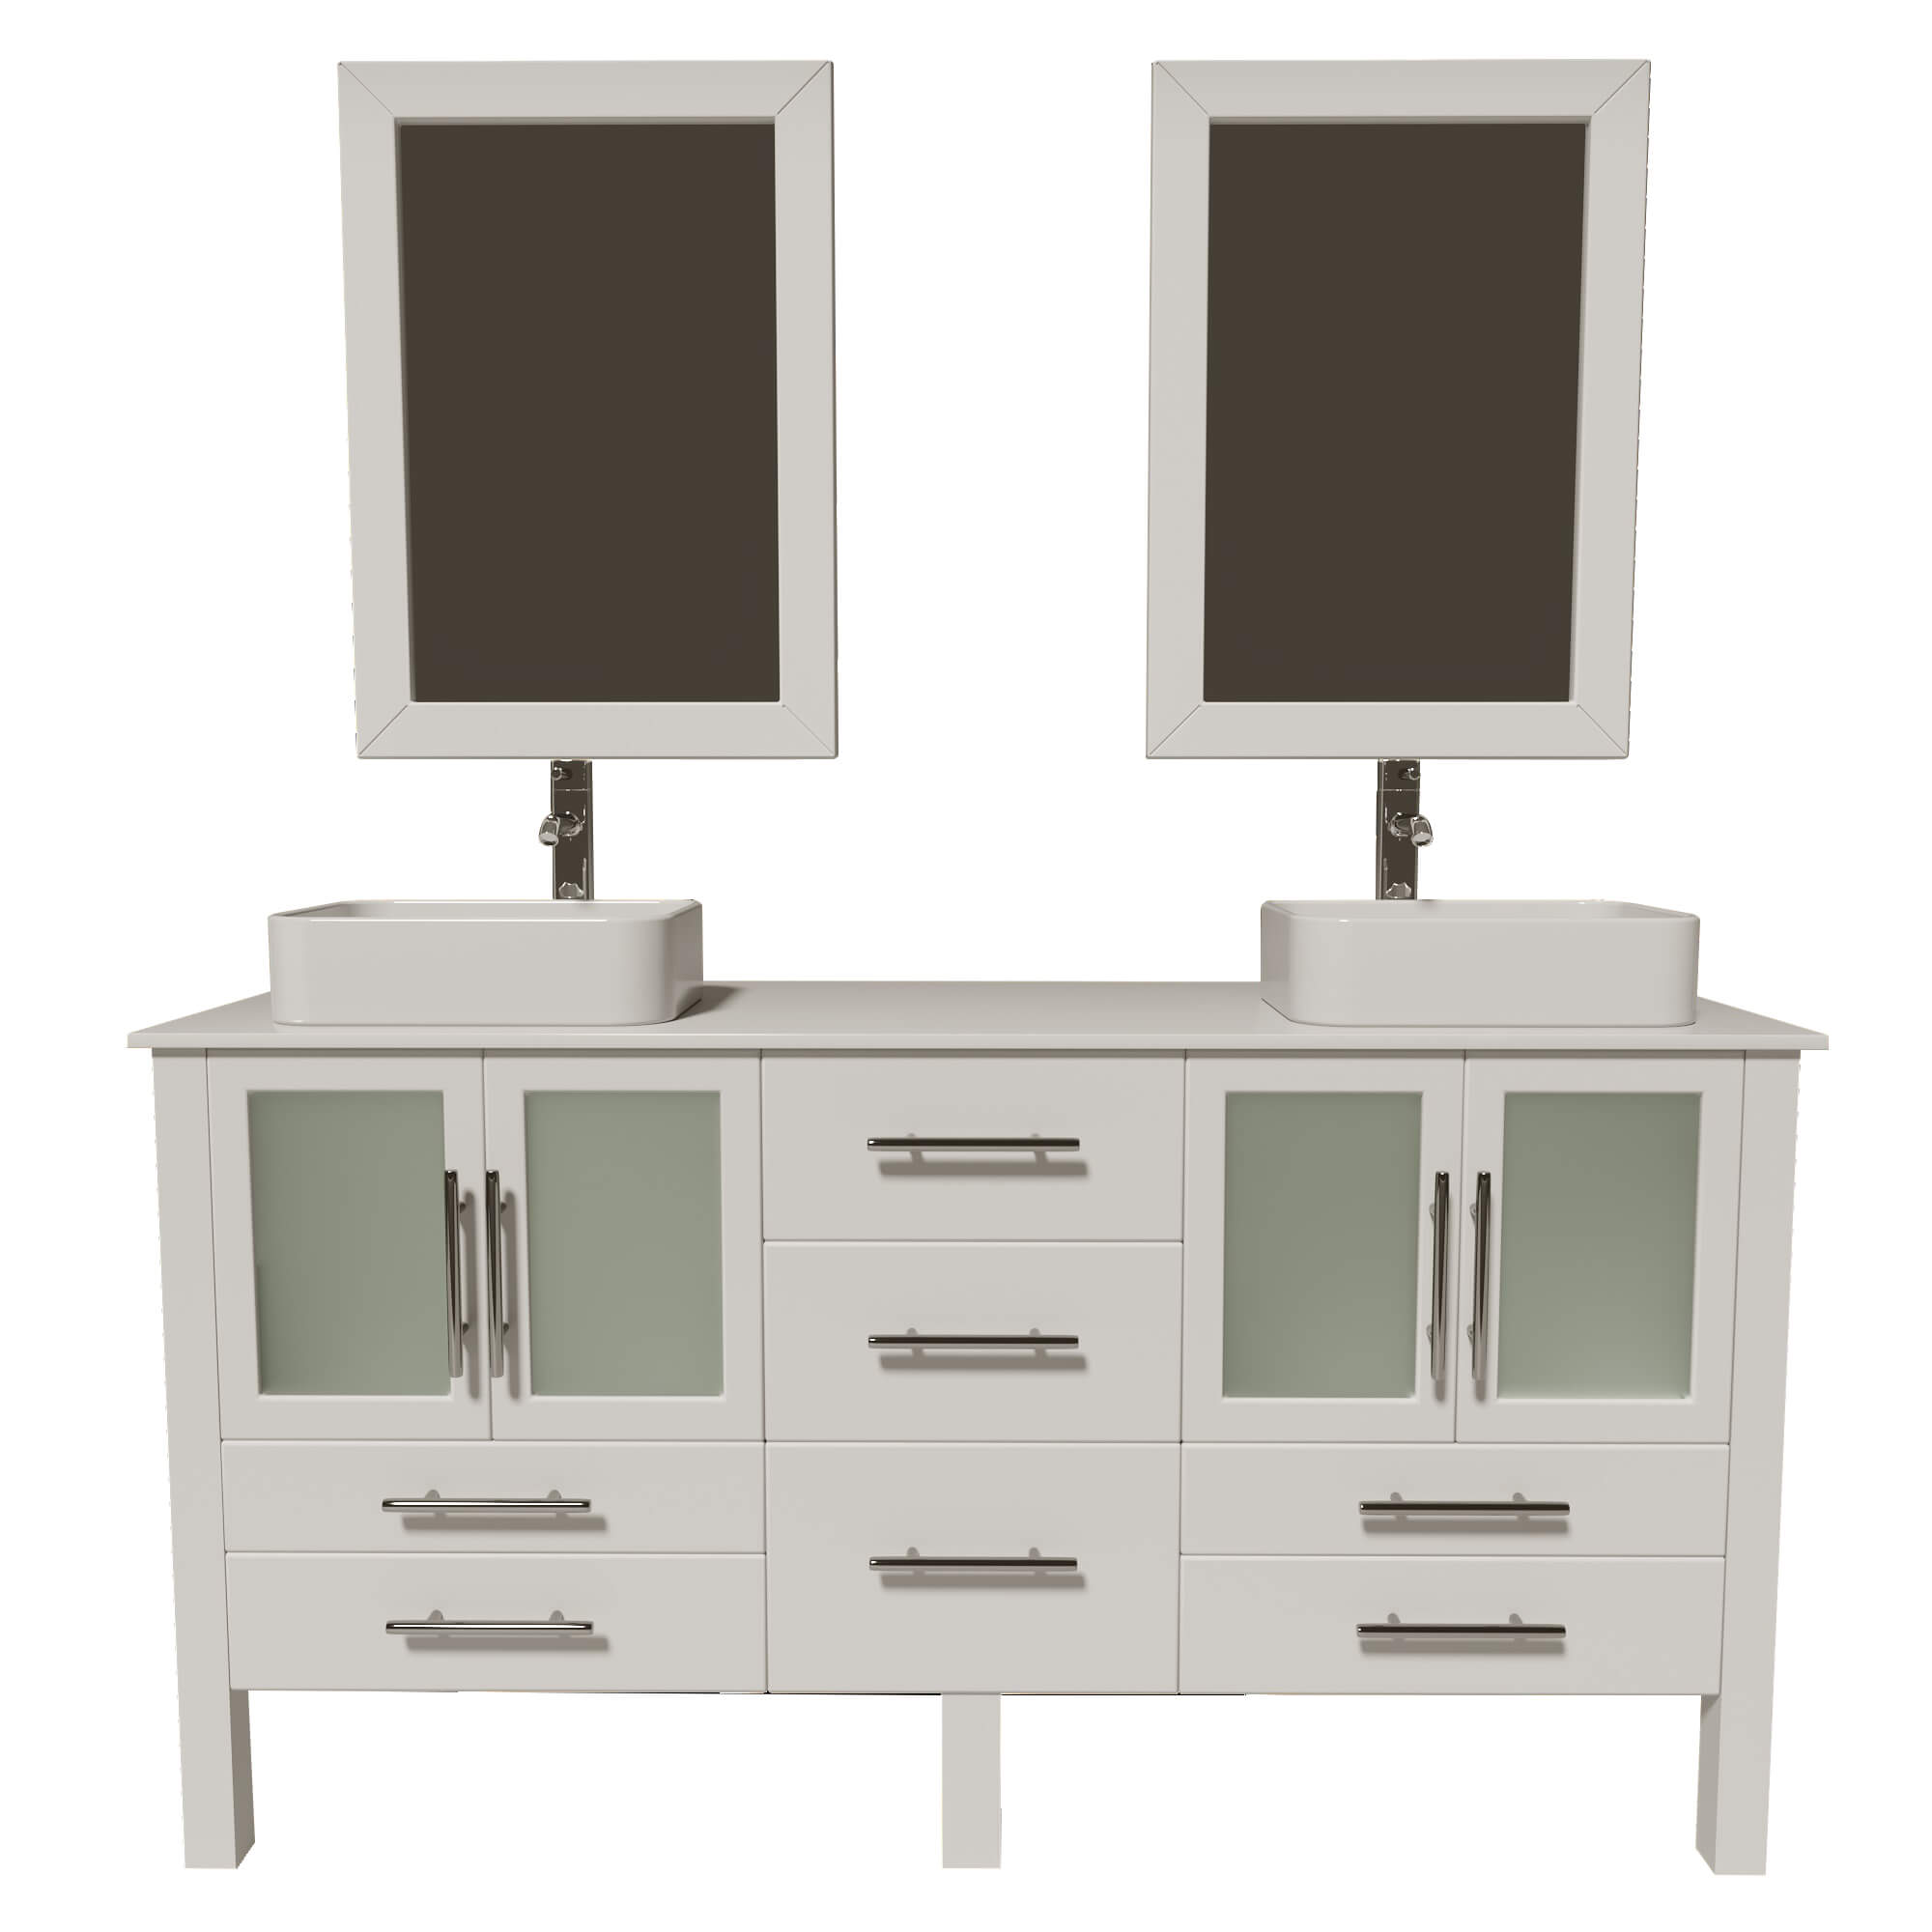 Cambridge Plumbing 8119W 63" Double Bathroom Vanity in White with White Porcelain Top and Vessel Sinks, Matching Mirrors, Front View with Chrome Faucets